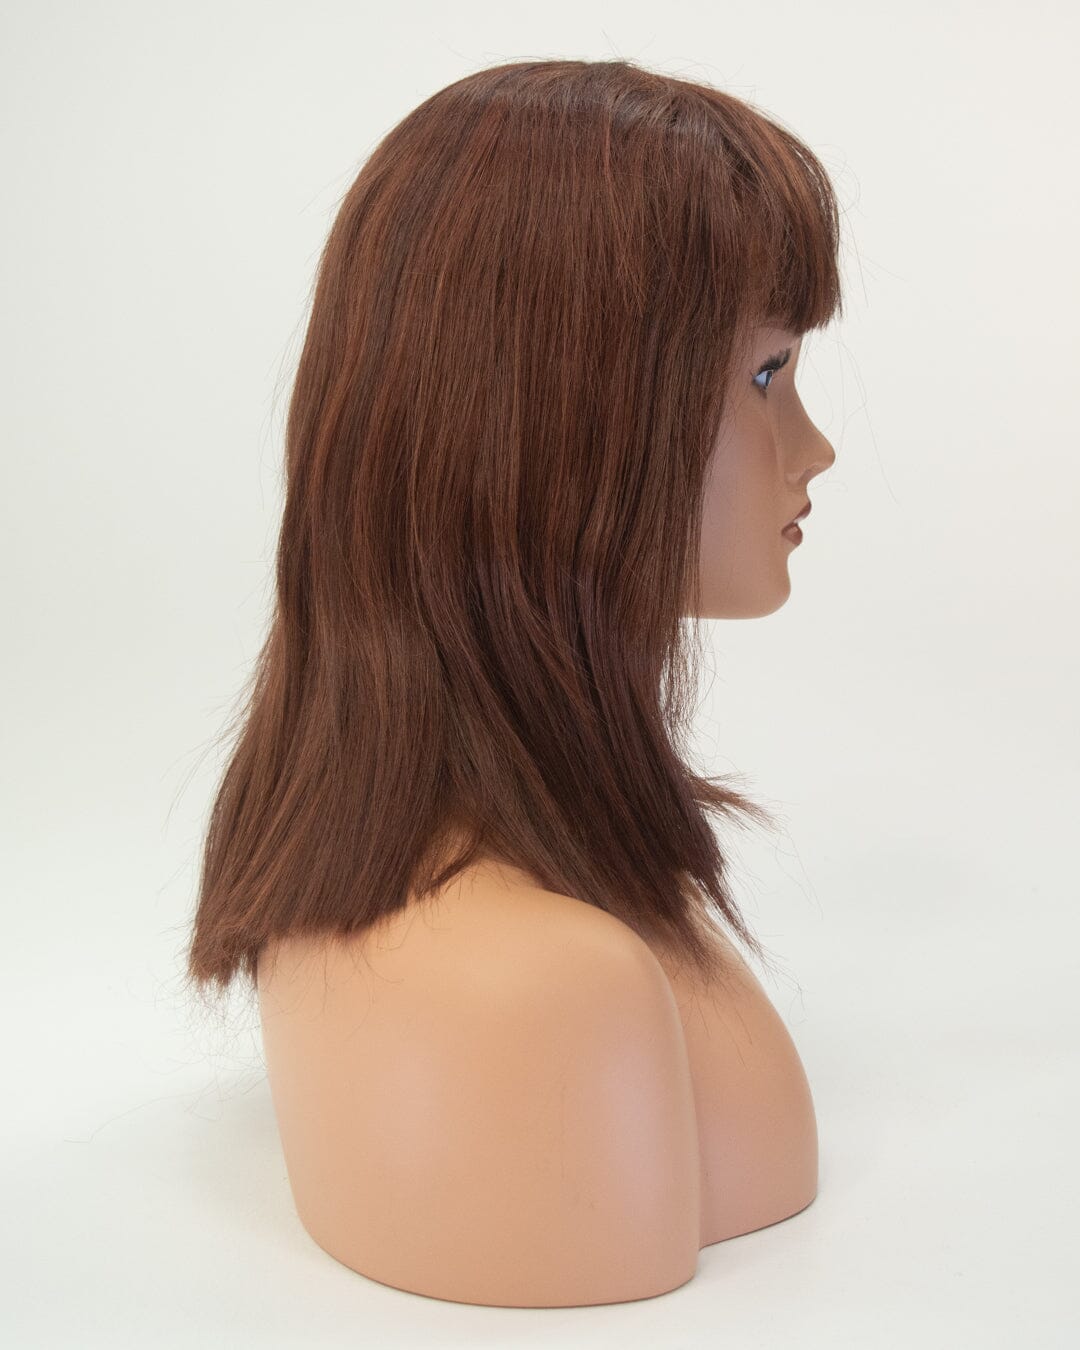 Red Brown 40cm Synthetic Hair Wig